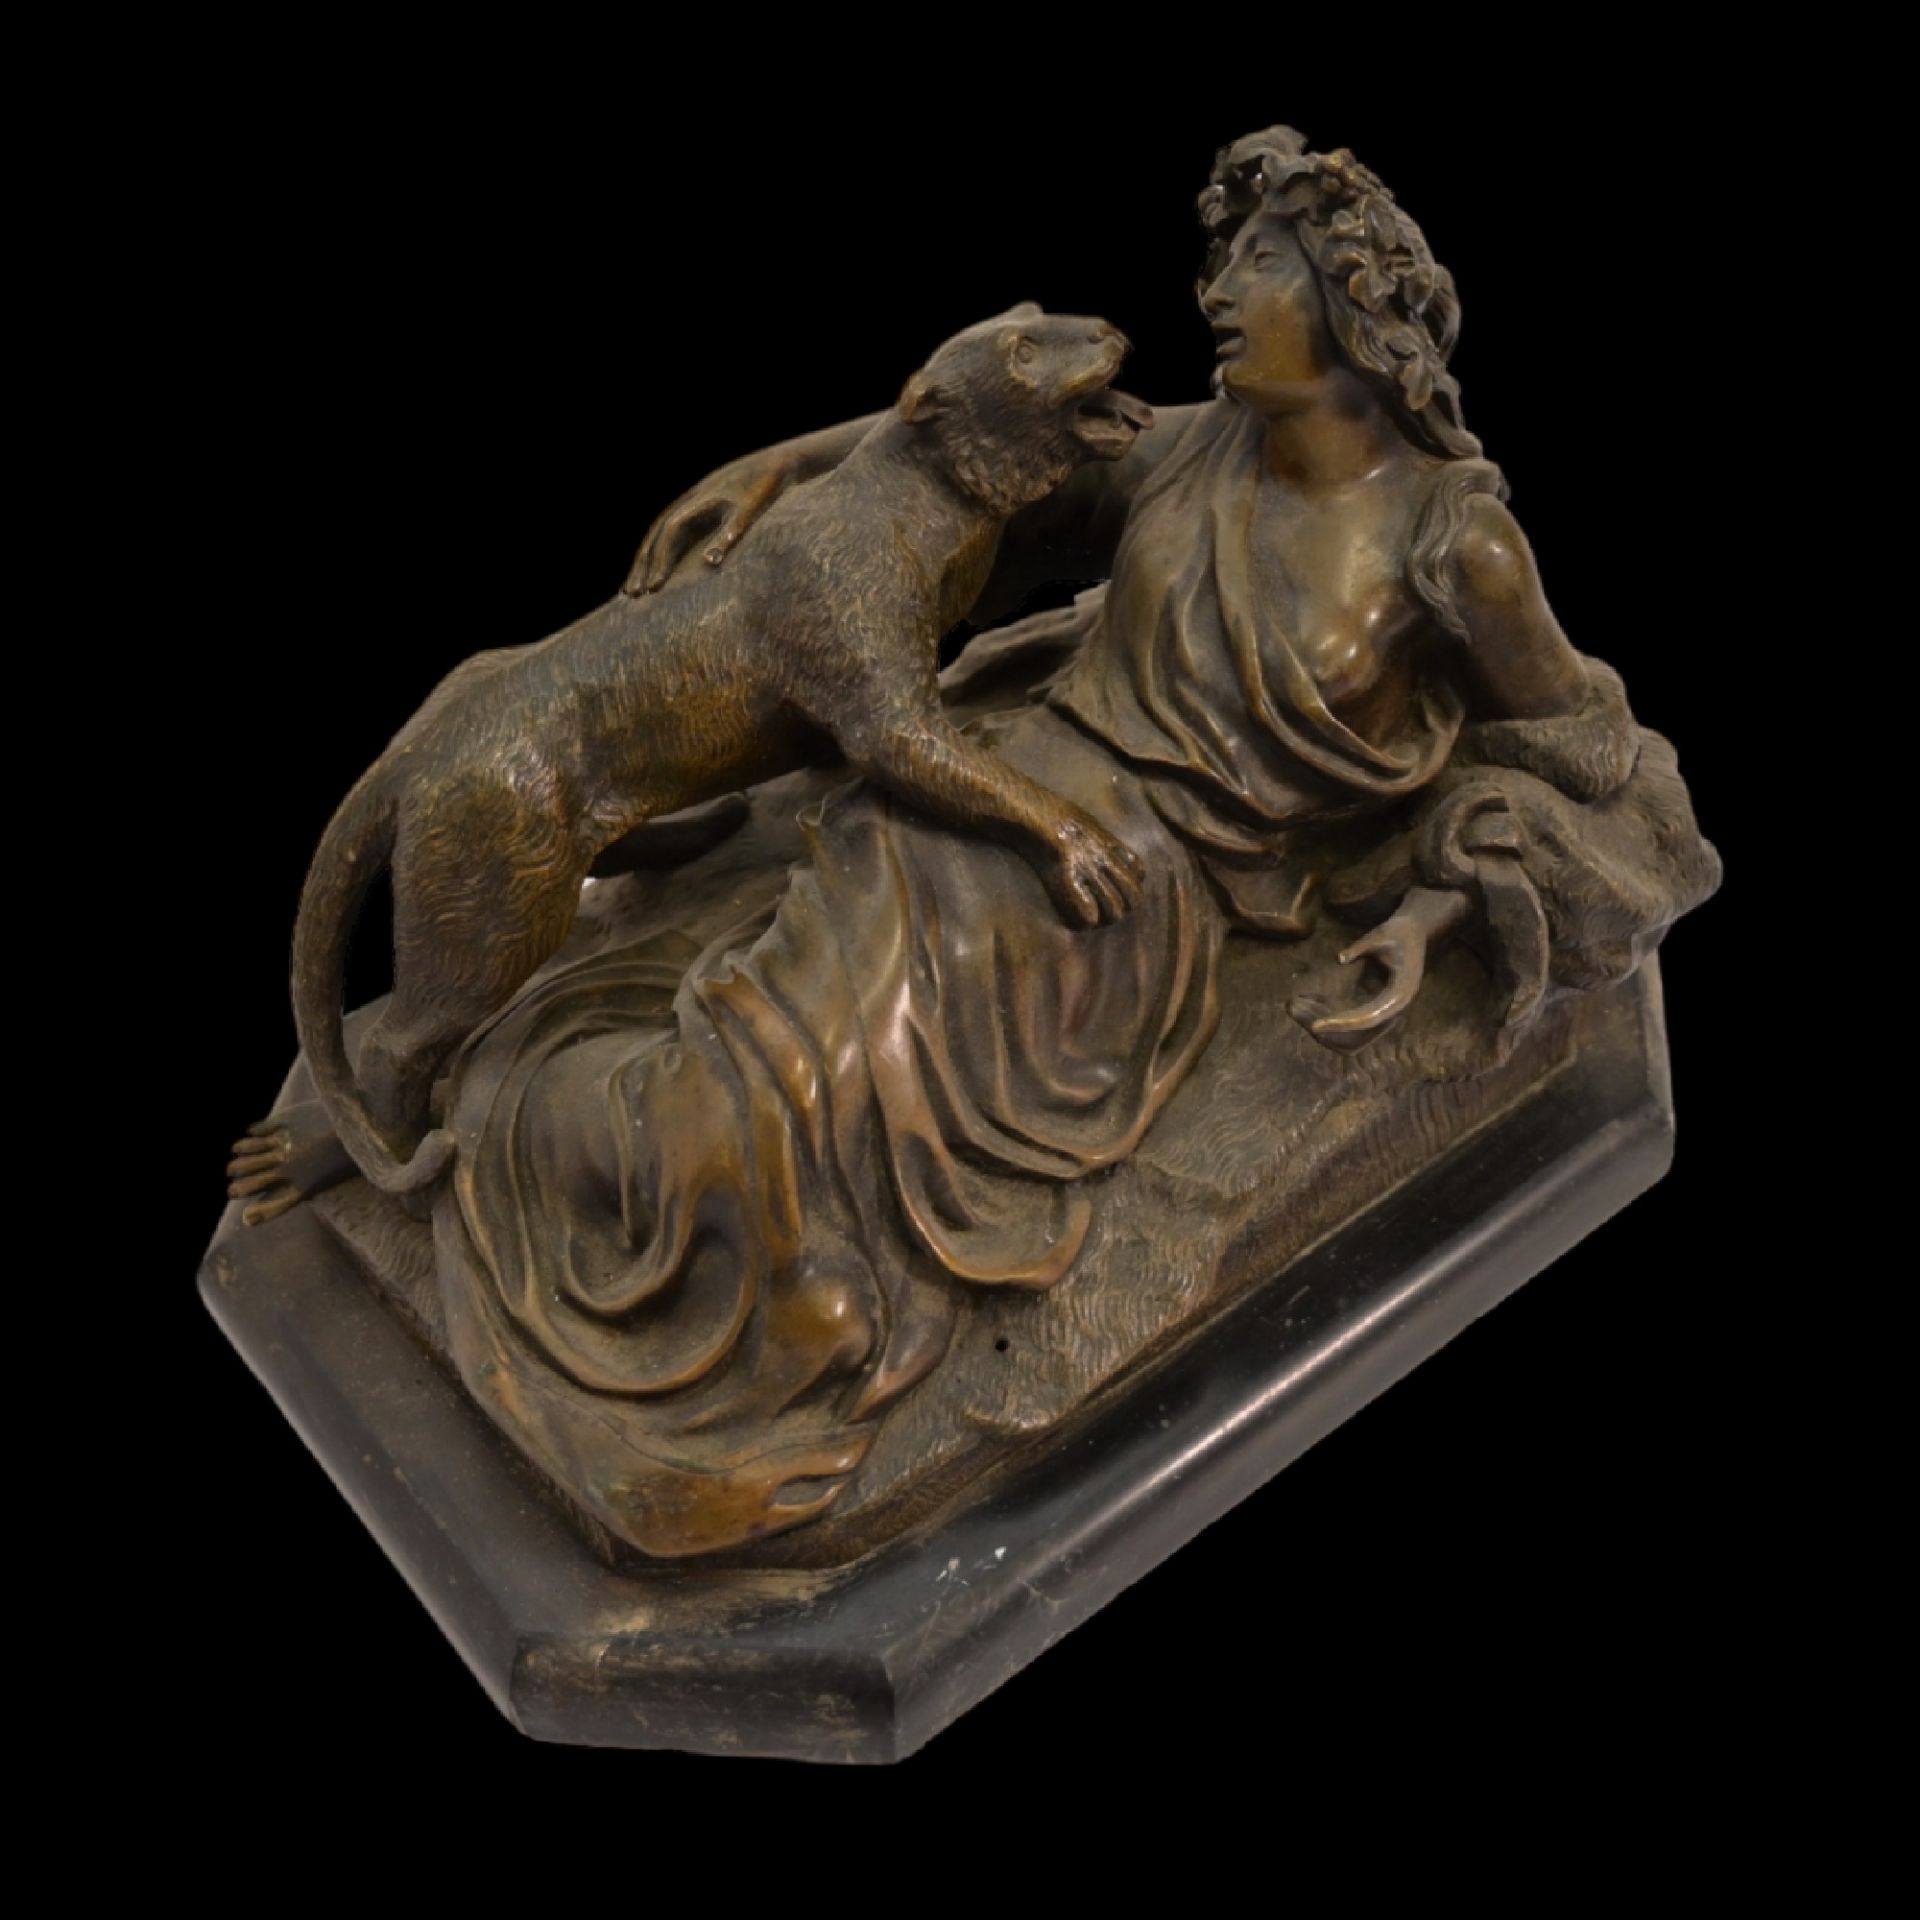 Bronze Sculpture of "Diana with Panther", France 19th century.